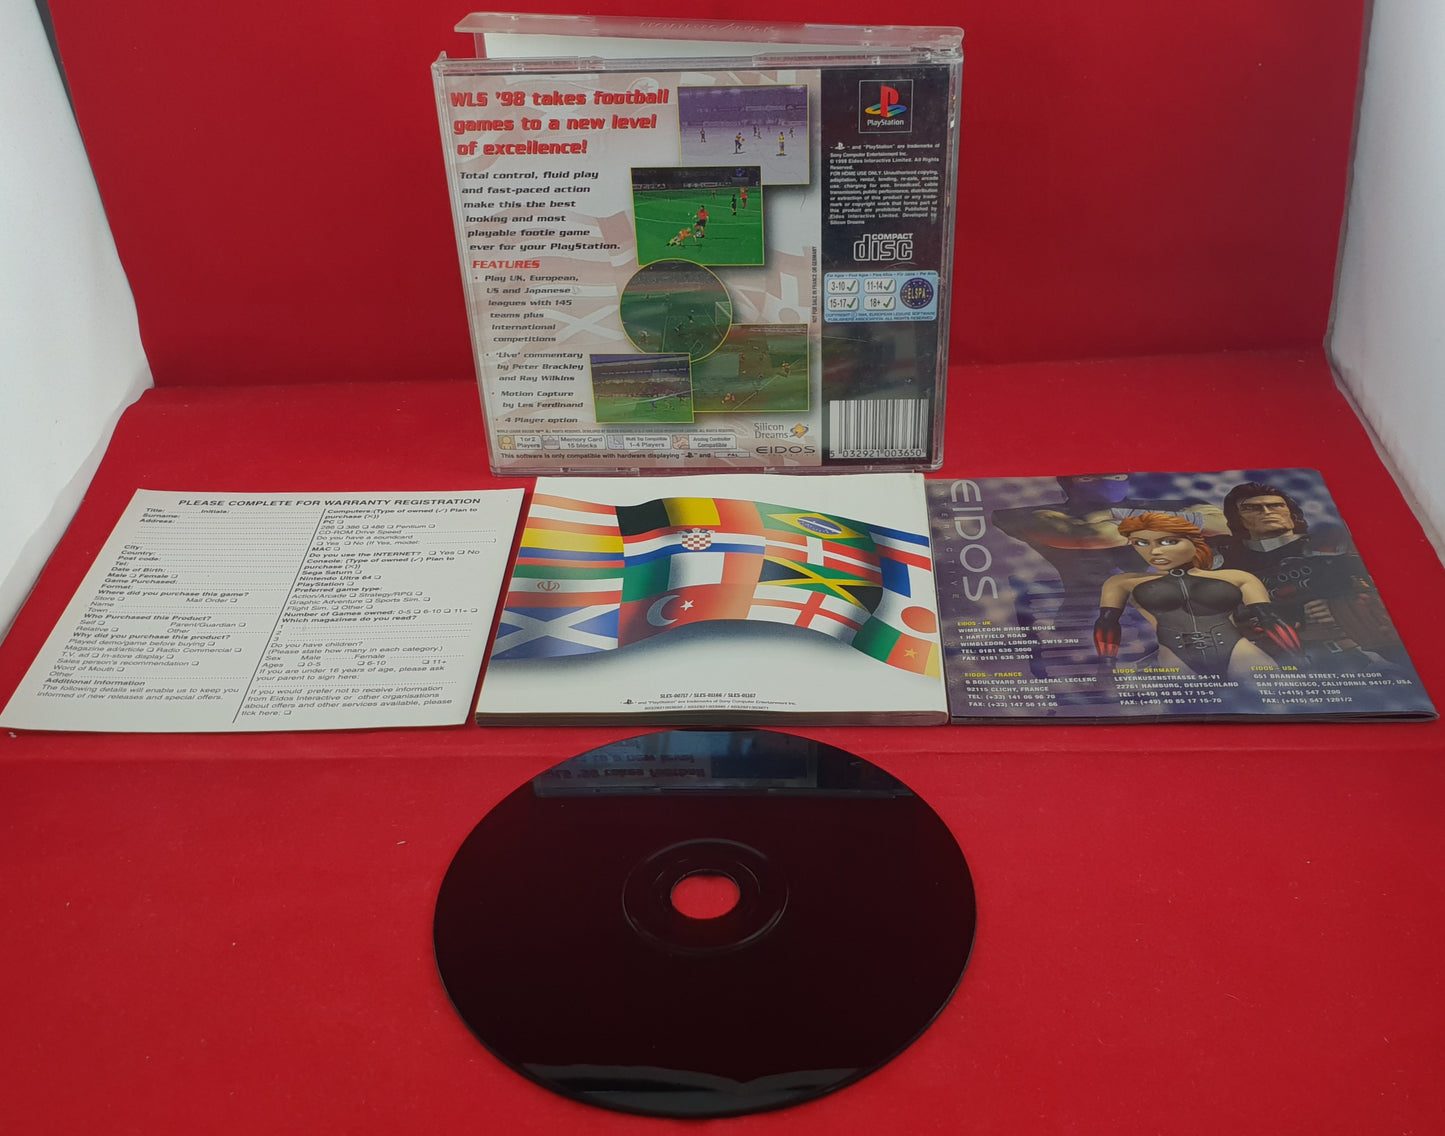 World League Soccer 98 Sony Playstation 1 (PS1) Game